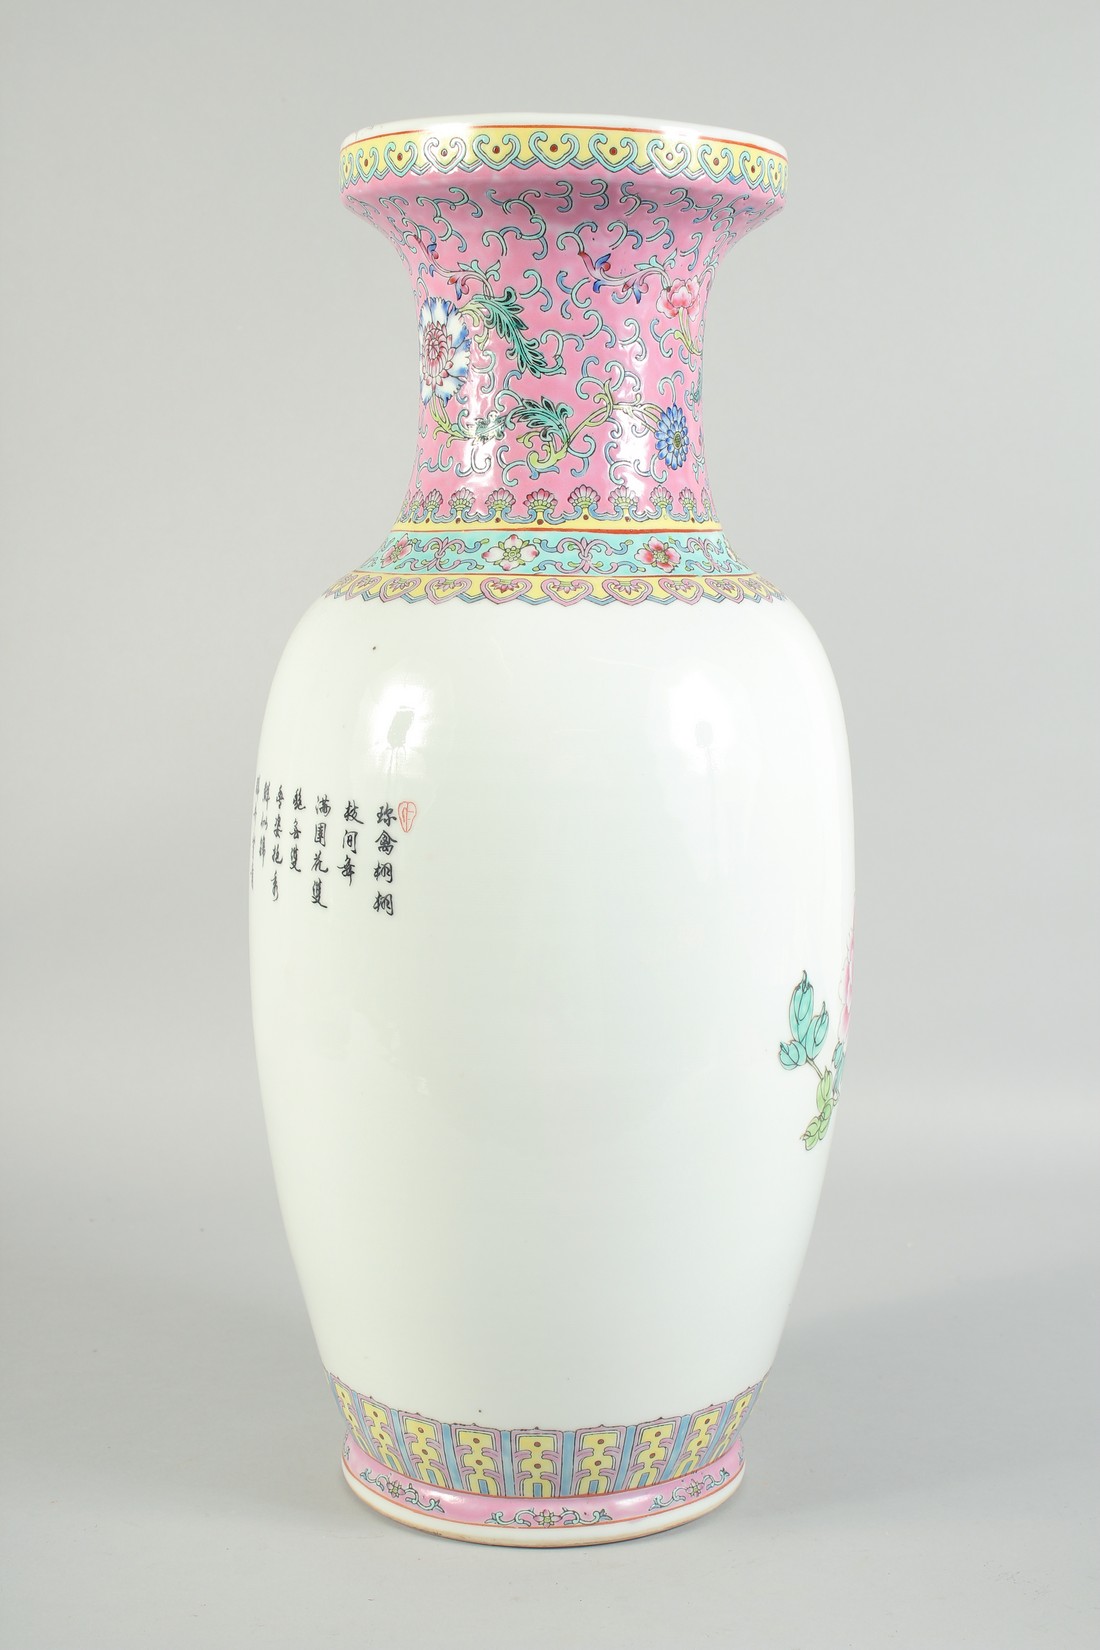 A CHINESE PORCELAIN REPUBLIC VASE with birds and calligraphy. 19ins high. - Image 2 of 5